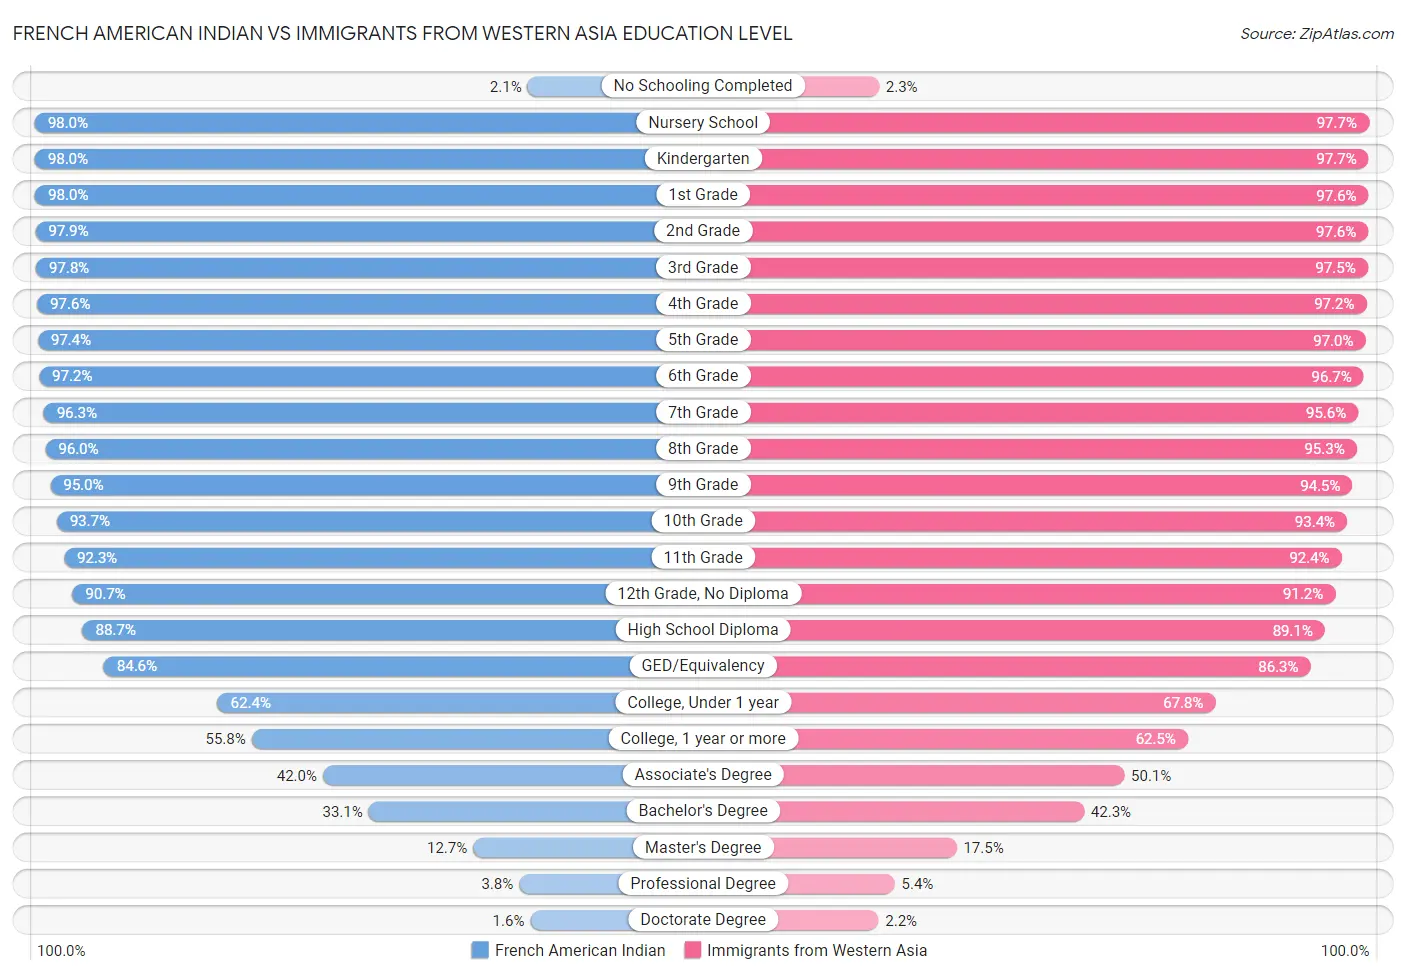 French American Indian vs Immigrants from Western Asia Education Level